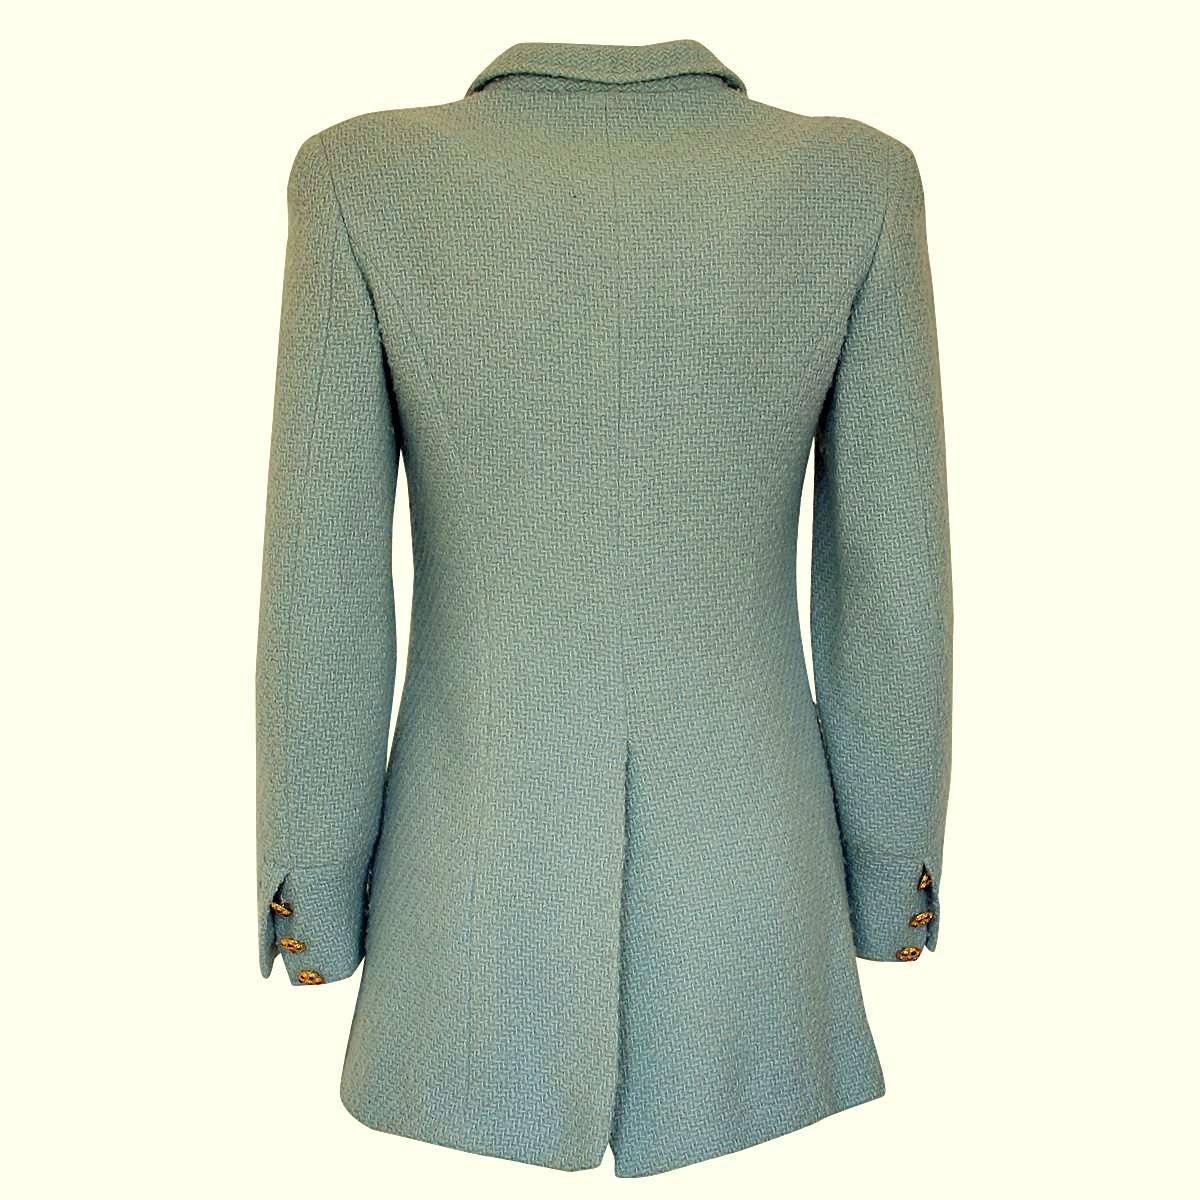 Super classy and beautiful Chanel jacket
Vintage from 1996
Wool (90%) and alpaca (10%)
Azure color
Silk lining
Golden jewel buttons
Four pockets
Total length from shoulder cm 69 (27.1 inches)
French size 36, italian 40
Made in